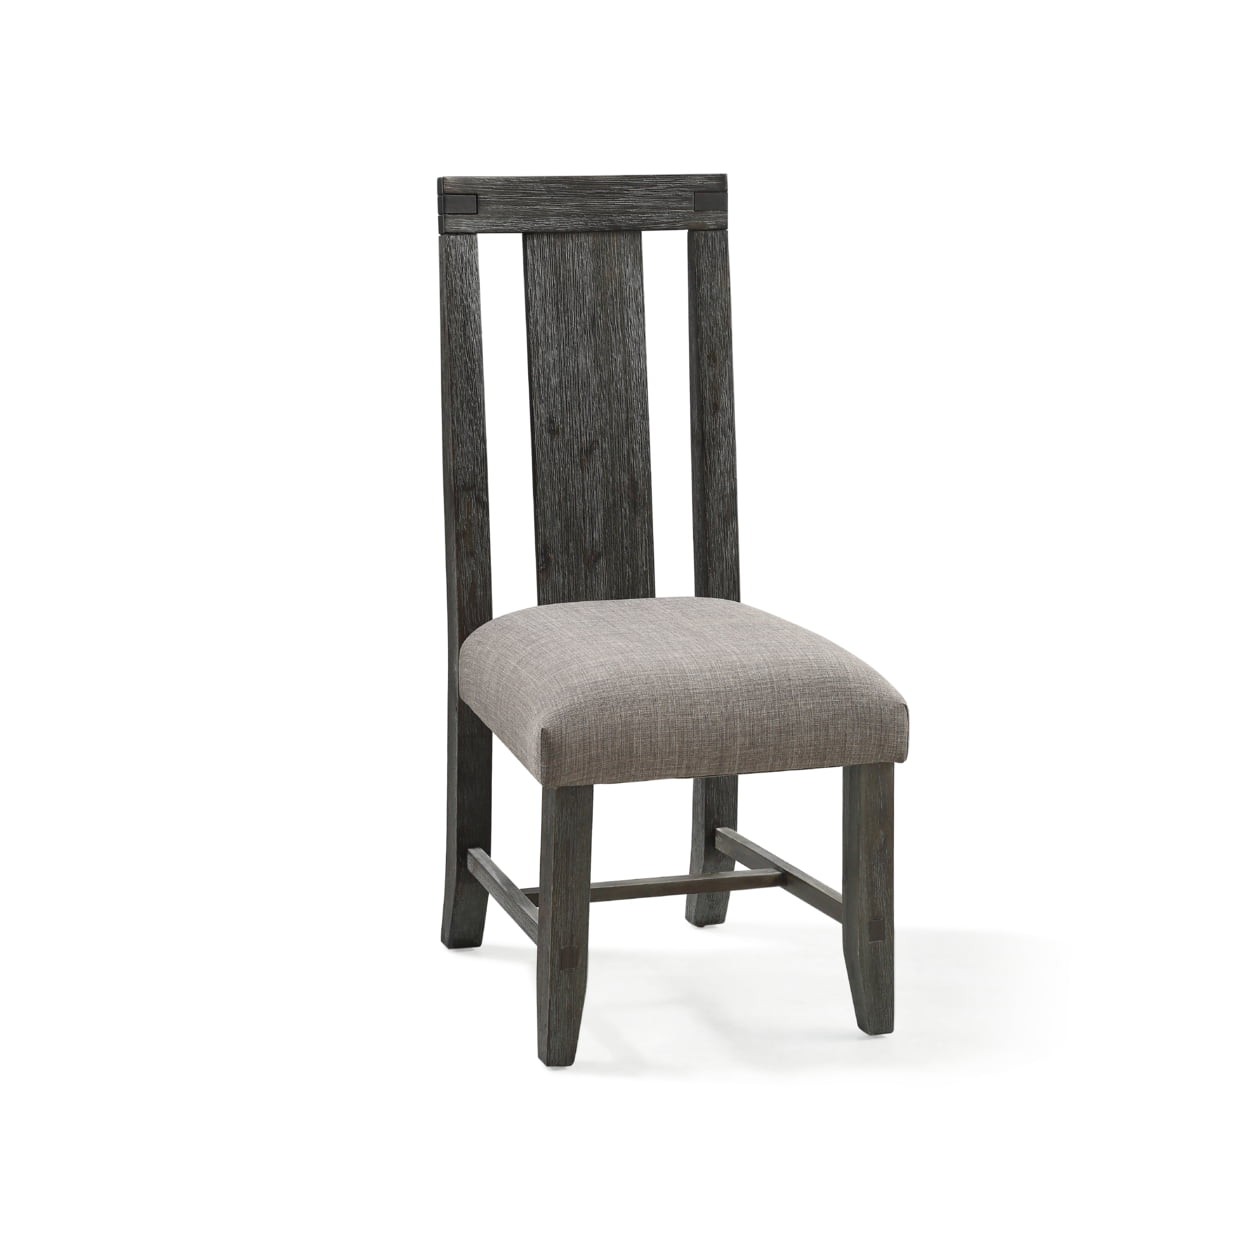 Picture of Benjara BM206661 Fabric Upholstered Chair with Chamfered Legs & Slatted Back - Gray - 41 x 19 x 24 in.